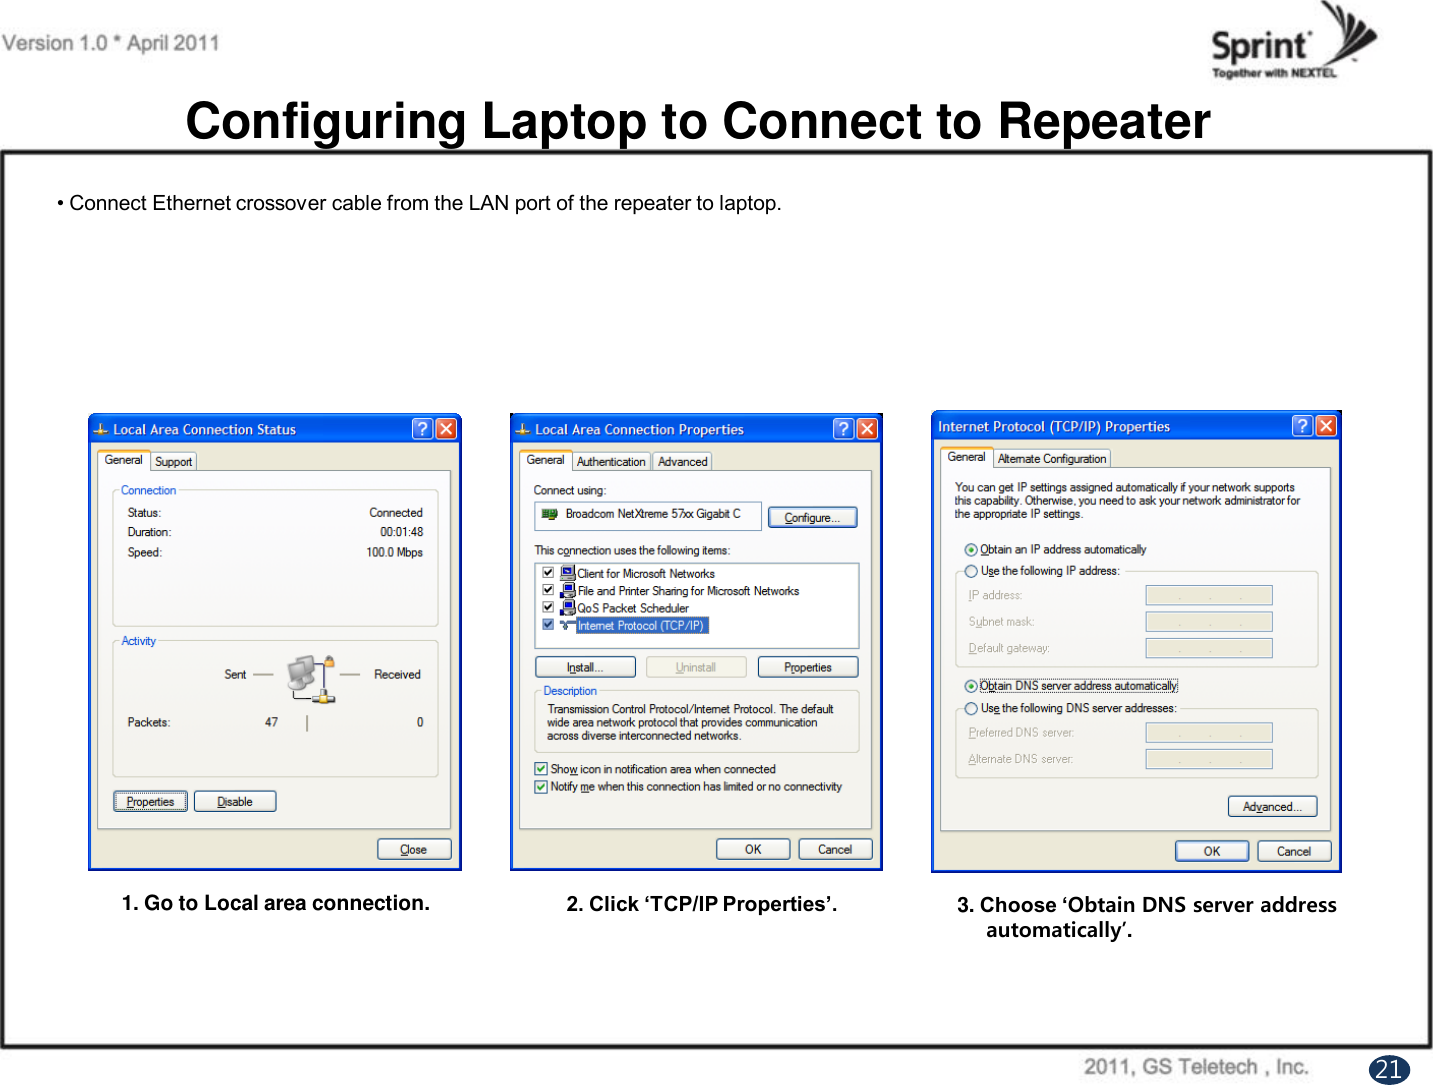 Configuring Laptop to Connect to Repeater1. Go to Local area connection. 2. Click ‘TCP/IP Properties’. 3. Choose ‘Obtain DNS server addressautomatically’.21• Connect Ethernet crossover cable from the LAN port of the repeater to laptop. 